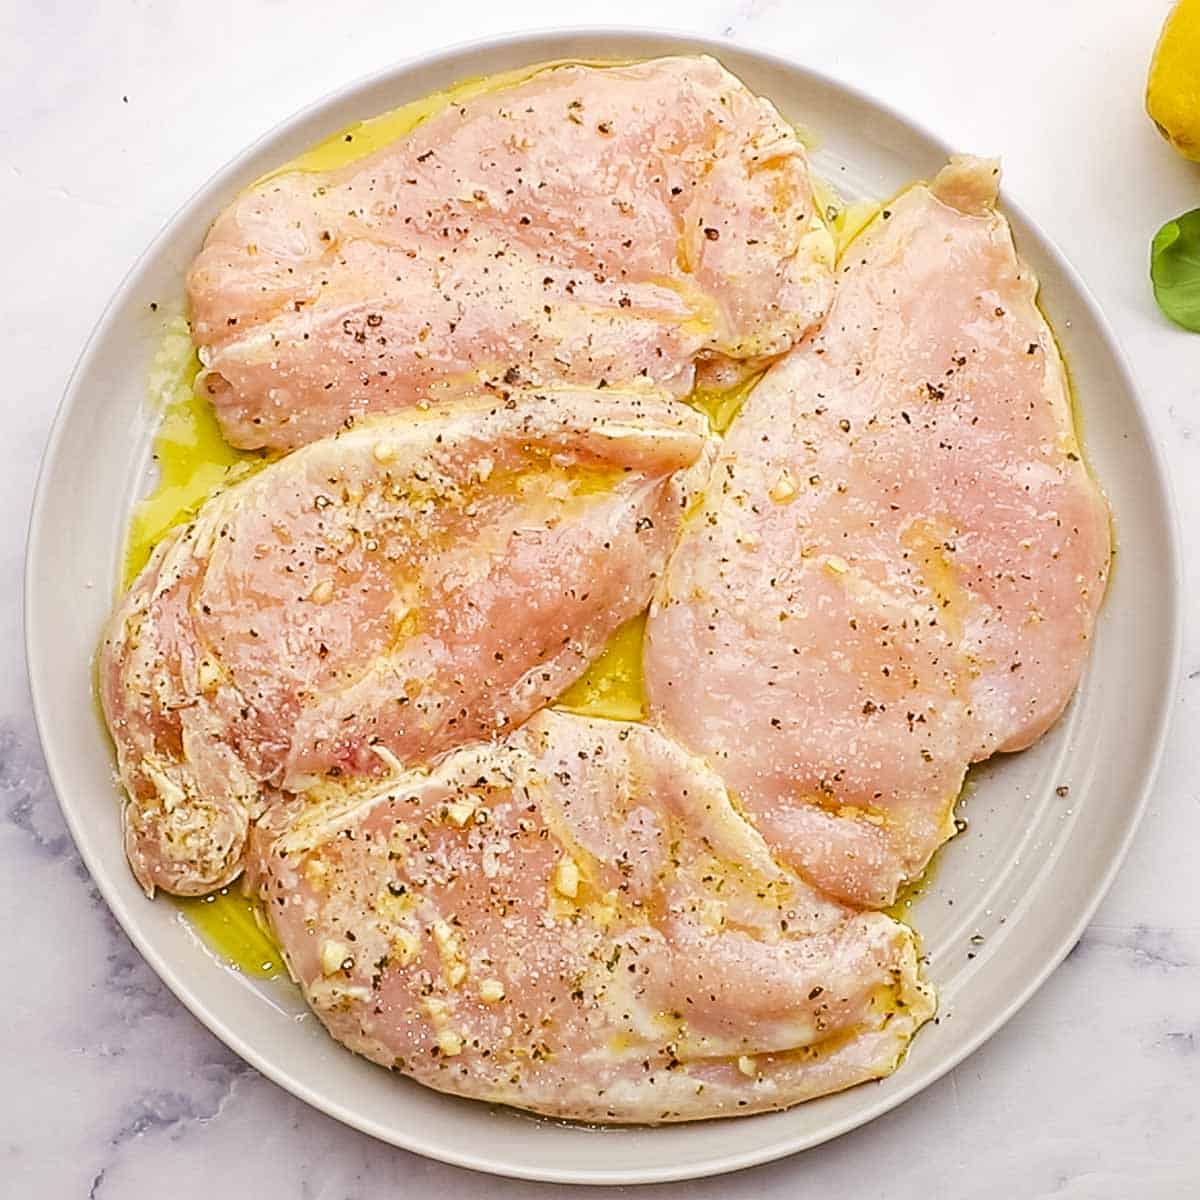 marinated chicken breasts on a plate sprinkled with salt and pepper